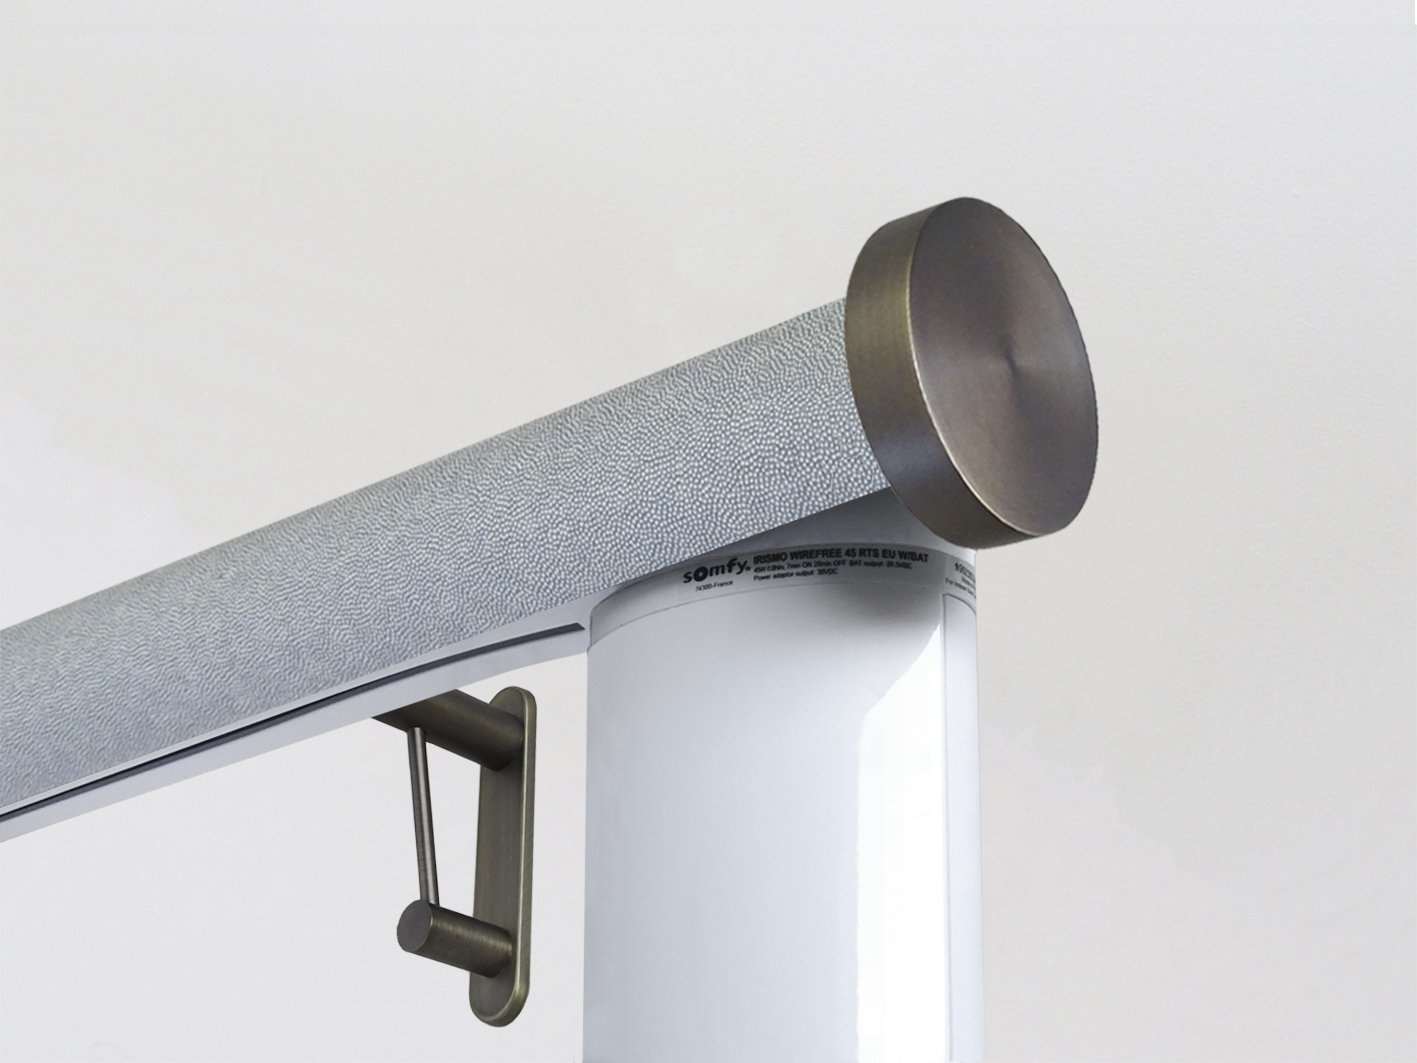 Motorised electric curtain pole in moonlight blue-grey, wireless & battery powered using the Somfy Glydea track | Walcot House UK curtain pole specialists